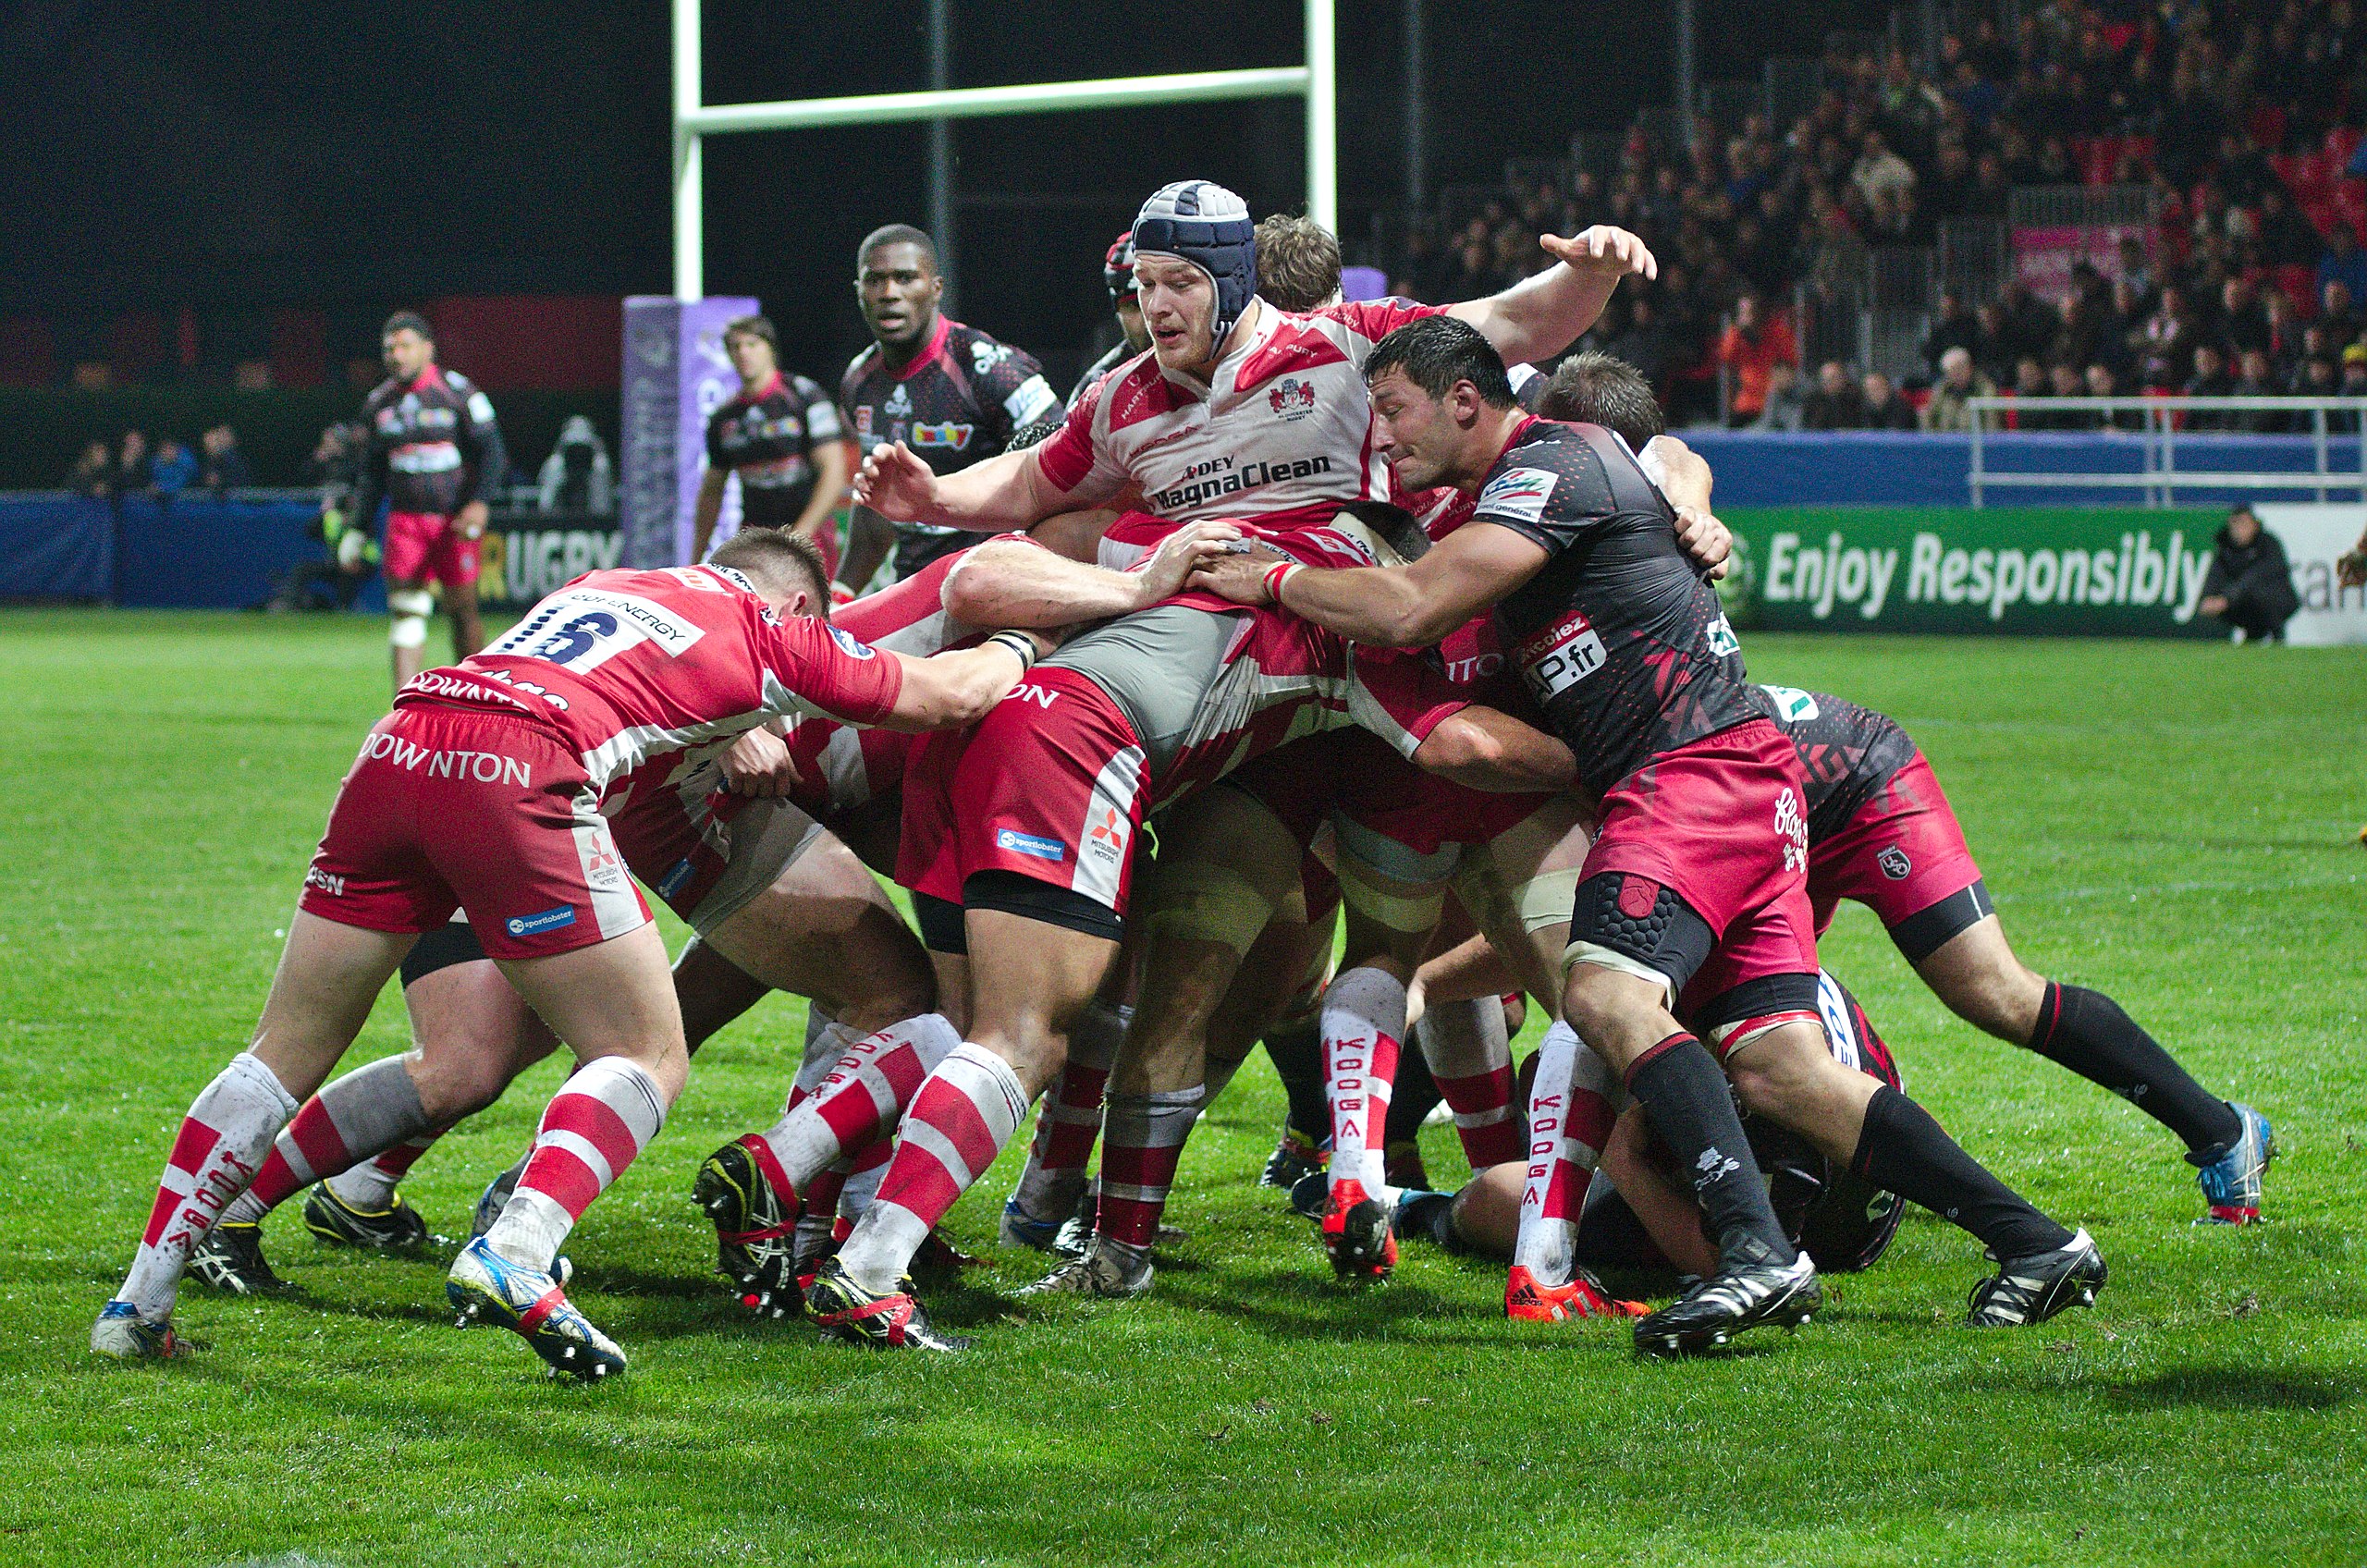 File:USO-Gloucester Rugby - 20141025 - Maul 2.jpg - Wikimedia Commons